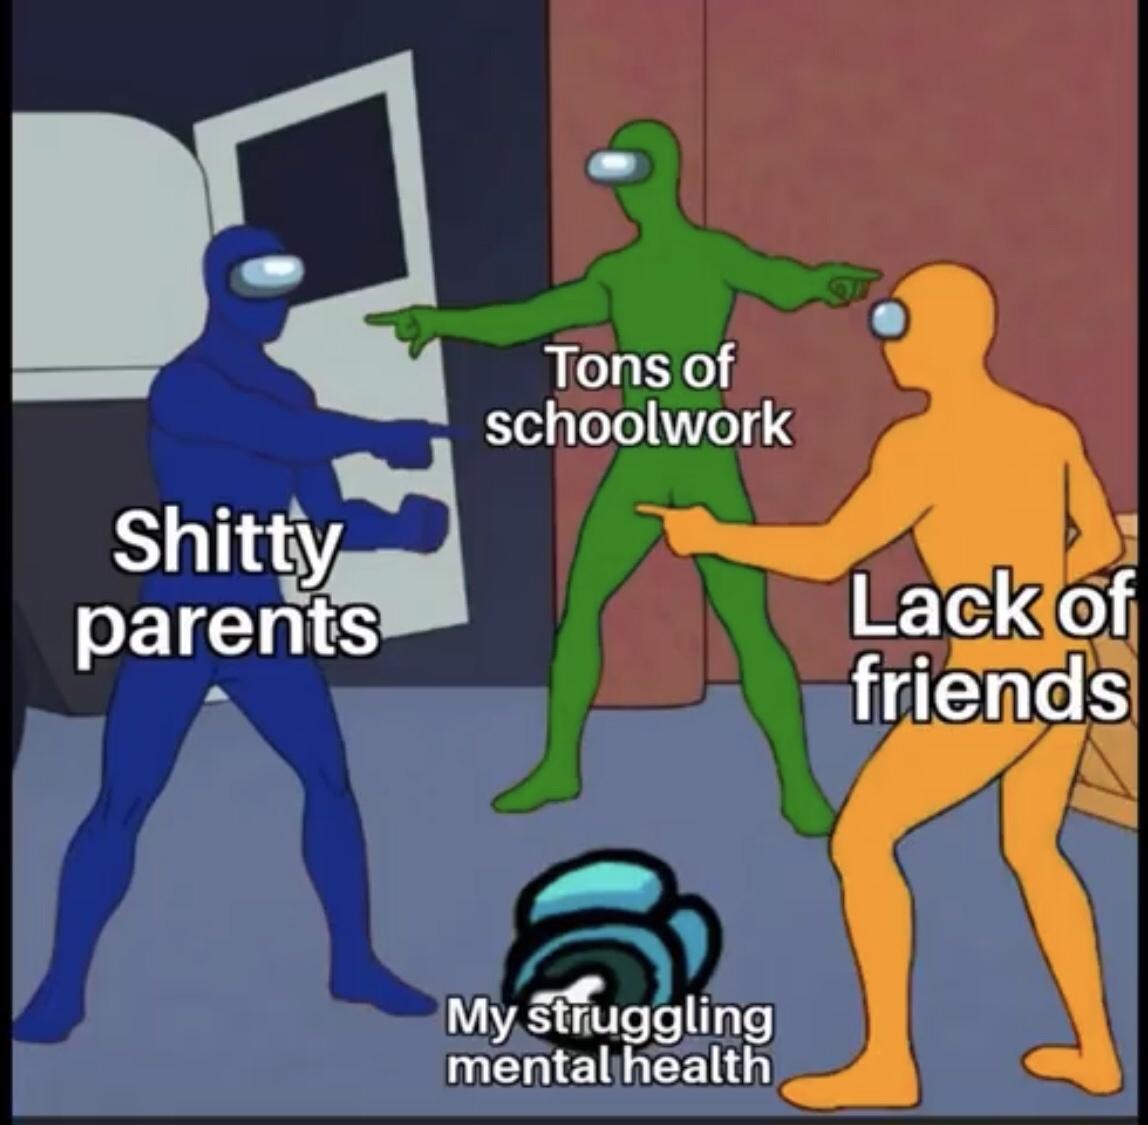 three spiderman meme - Tons of schoolwork Shitty parents Lack of friends My struggling mental health